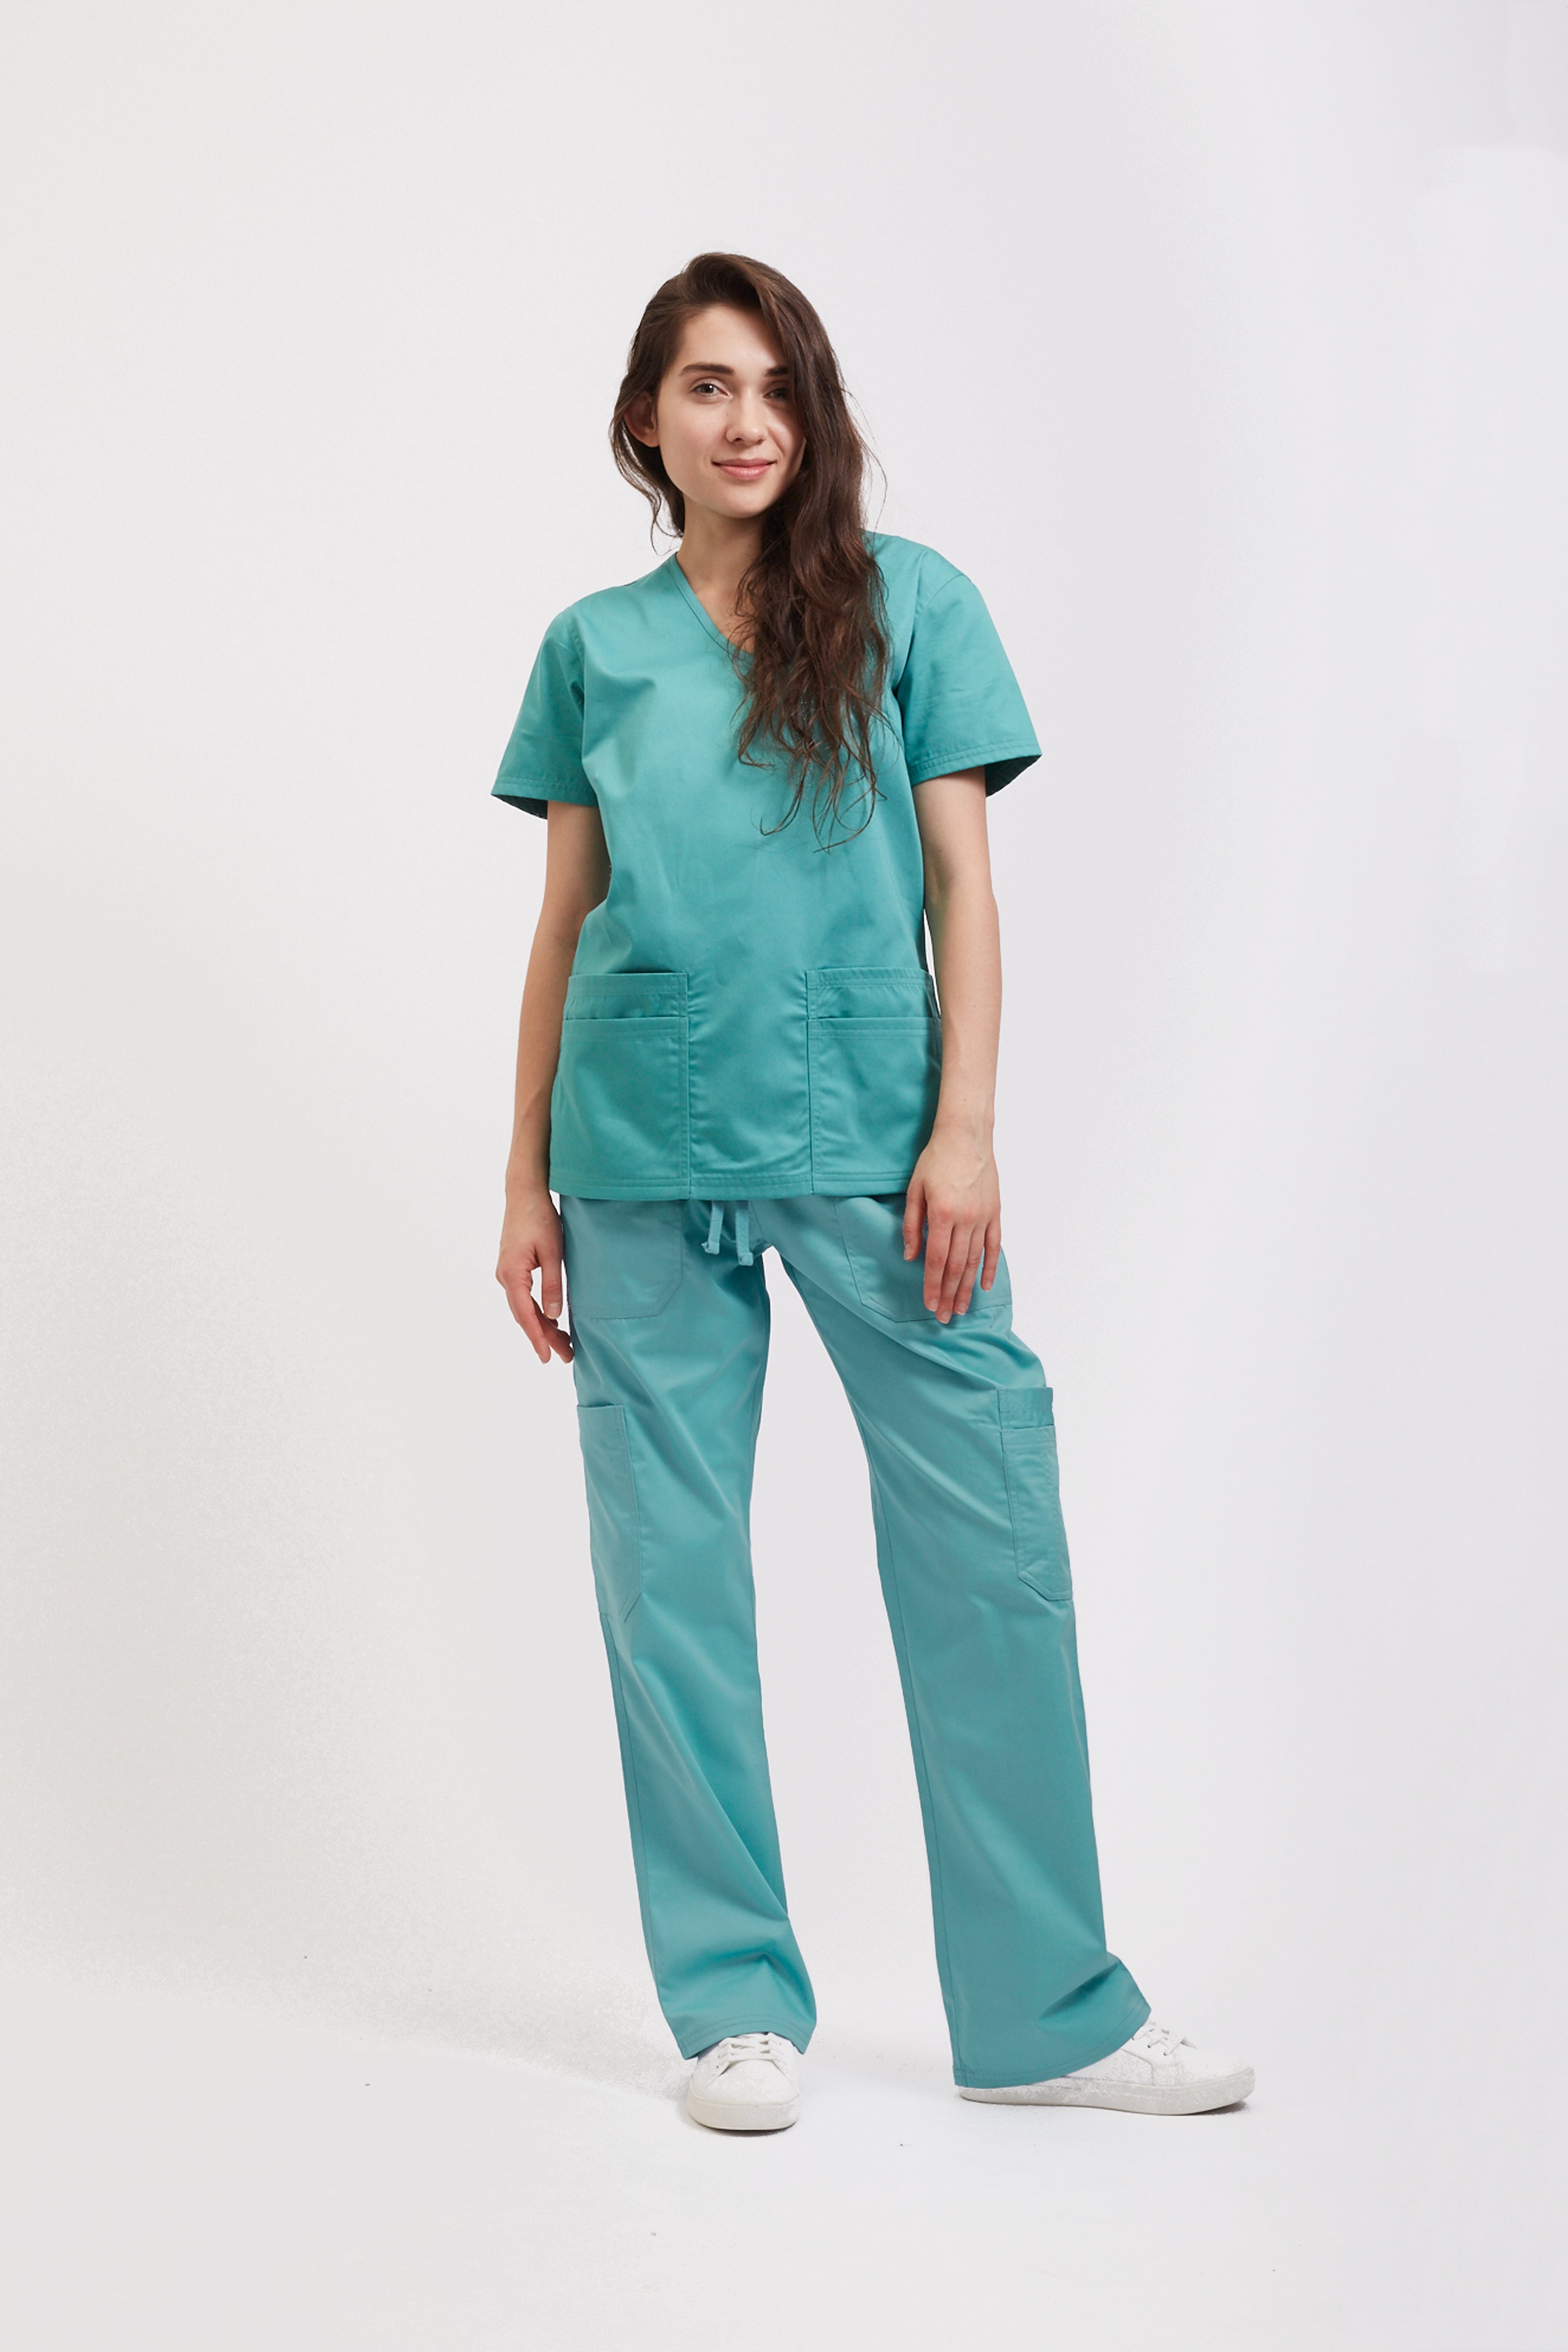 We are a healthcare apparel brand providing ethically manufactured